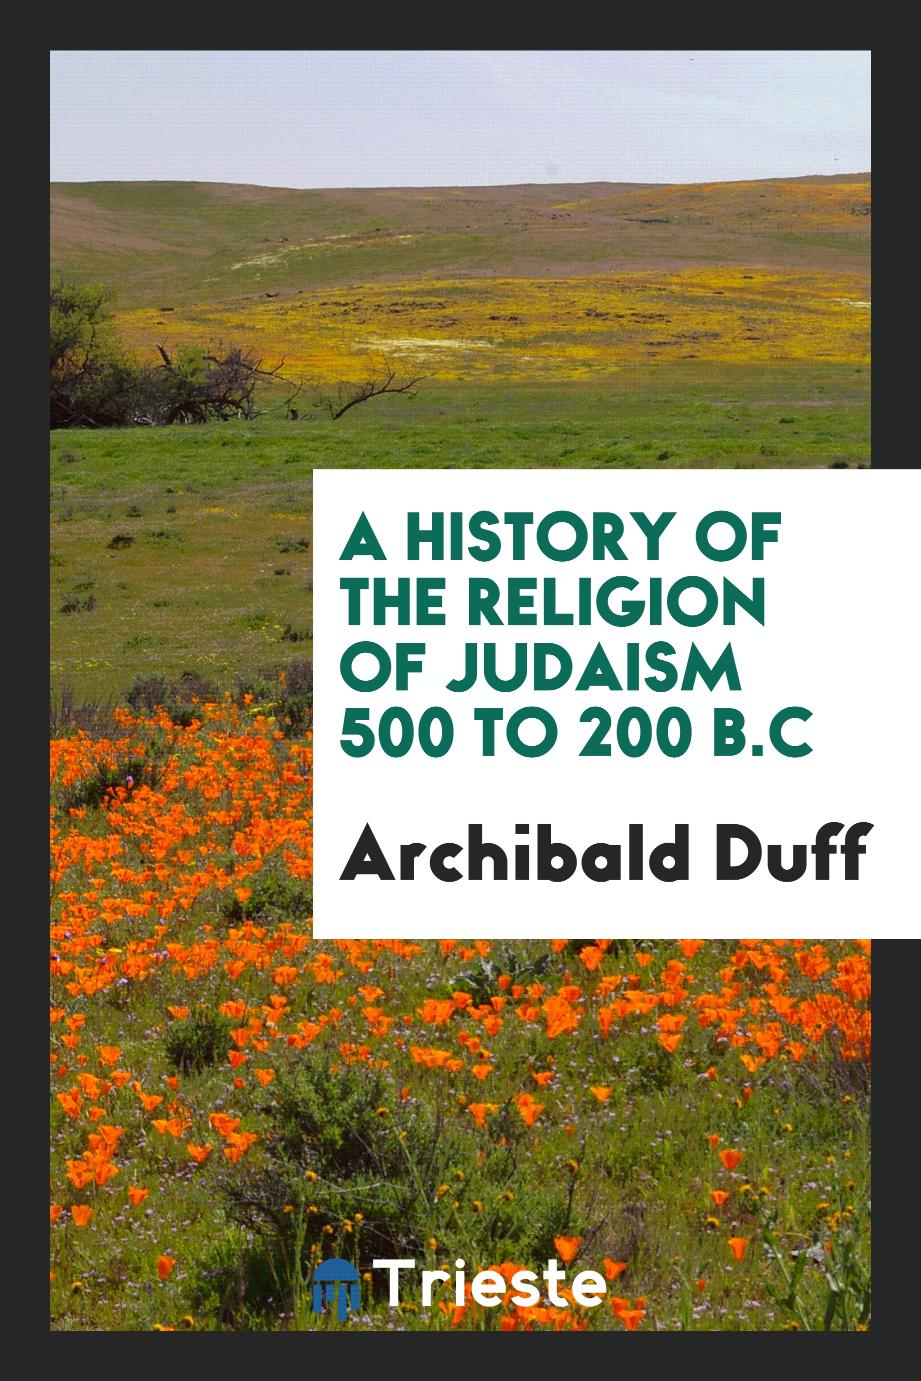 A history of the religion of Judaism 500 to 200 B.C